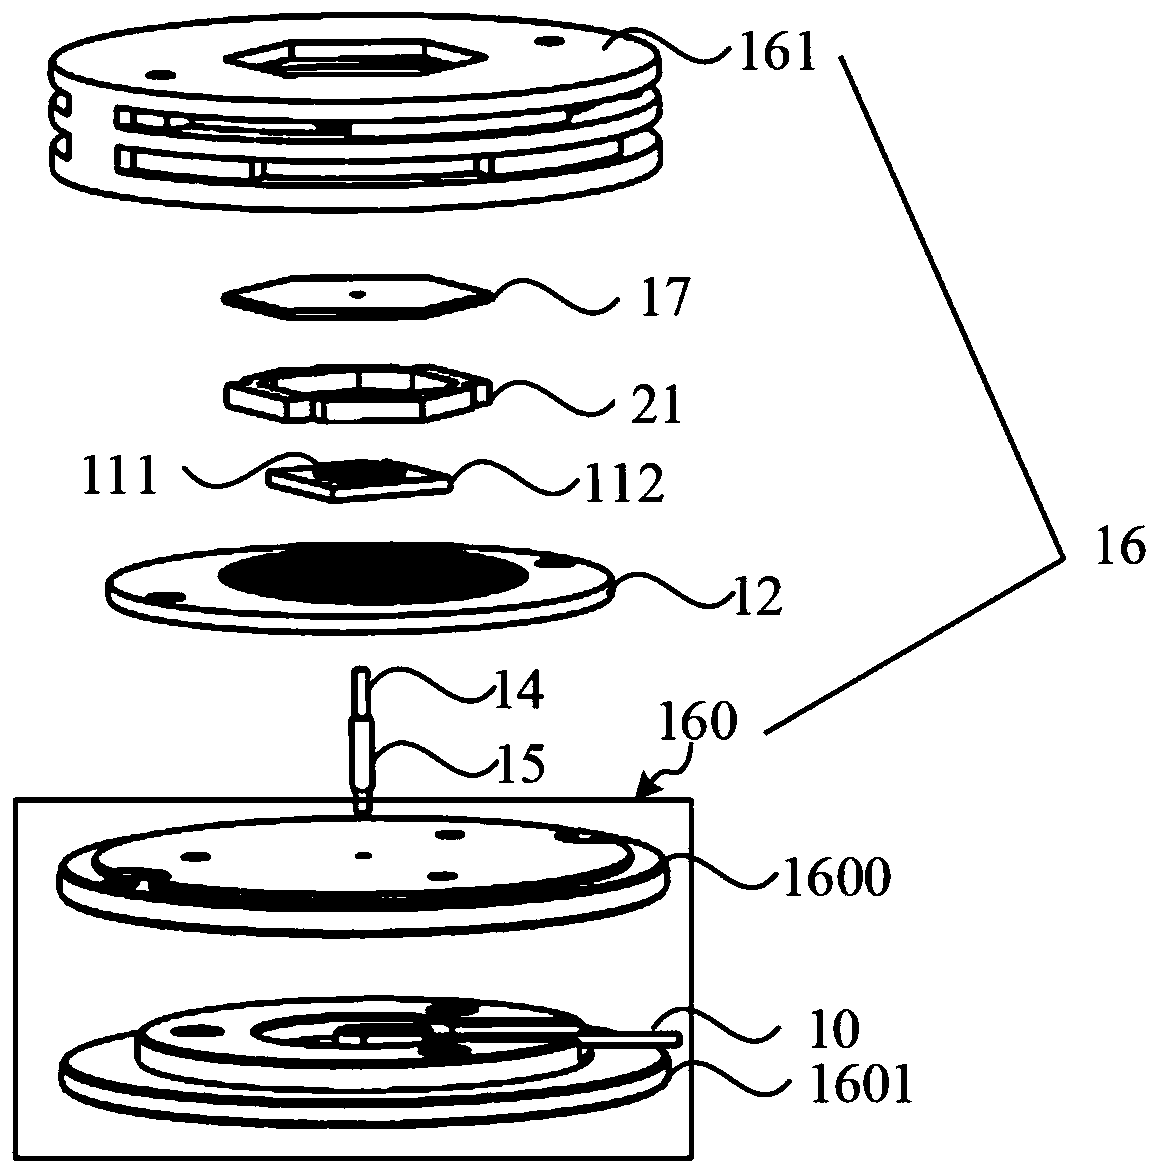 Tissue component non-invasive detection device and system, and wearable equipment